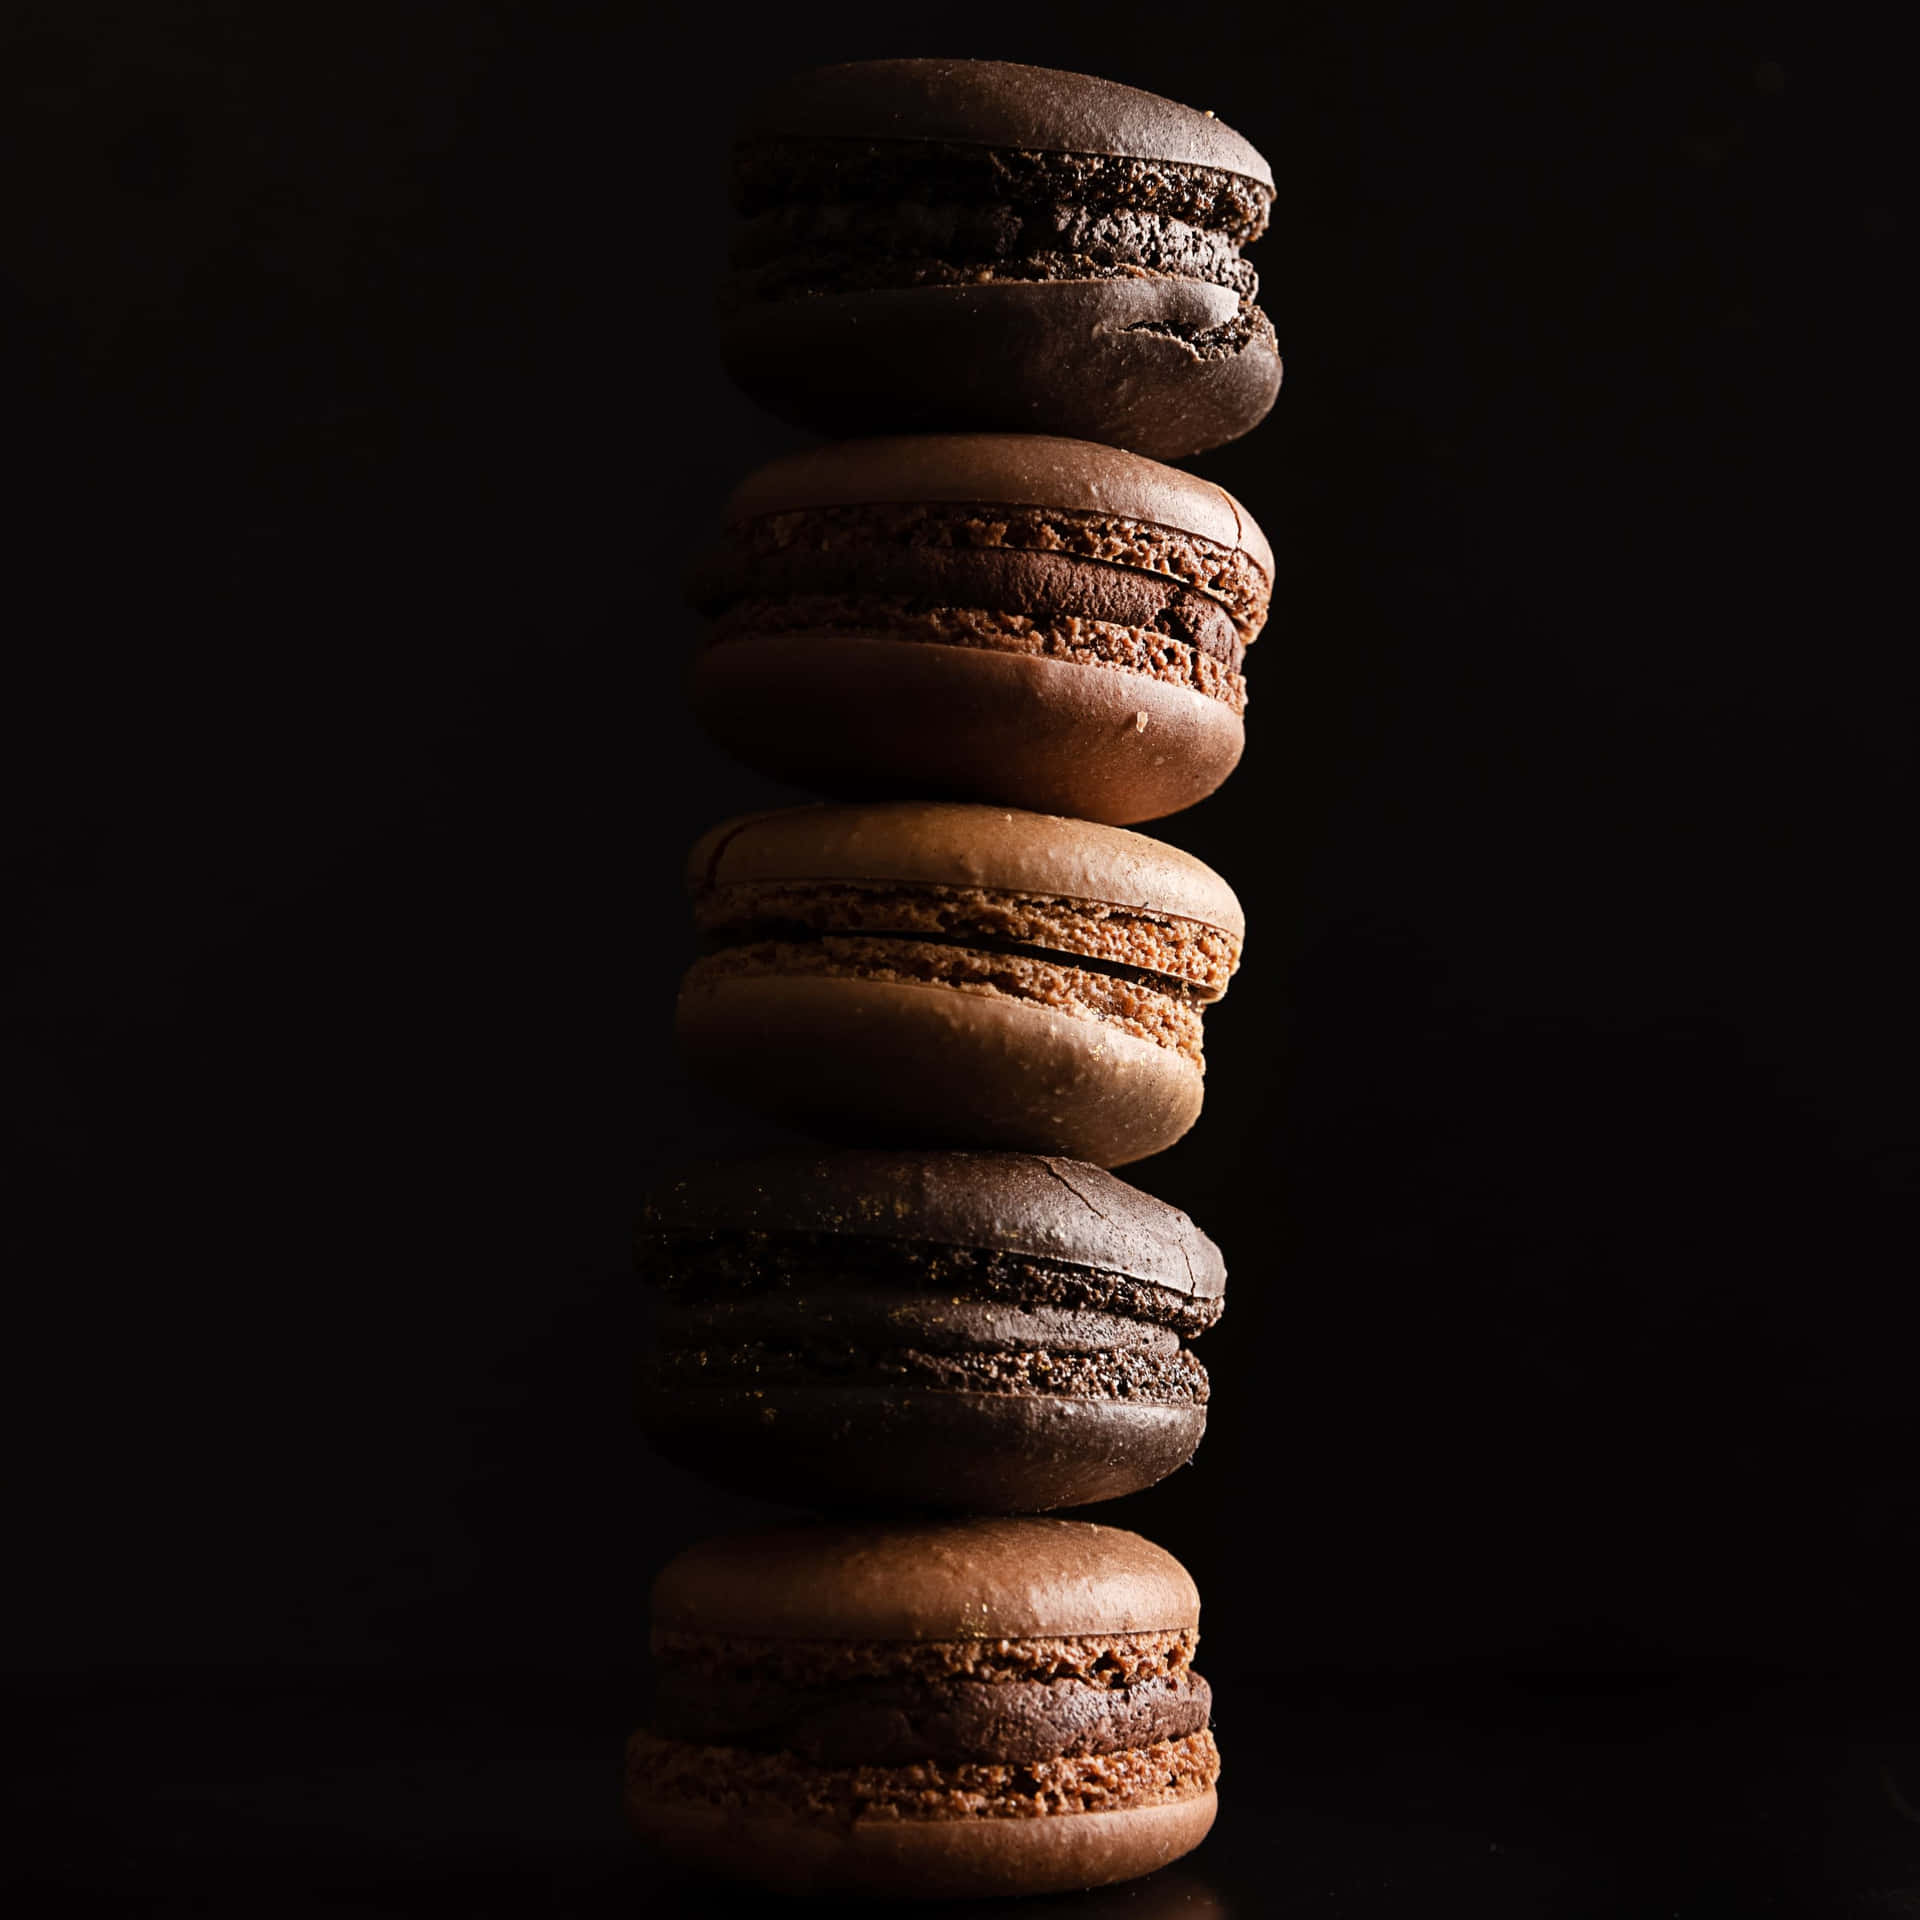 A stack of chocolate covered pastries on top - Macarons, chocolate